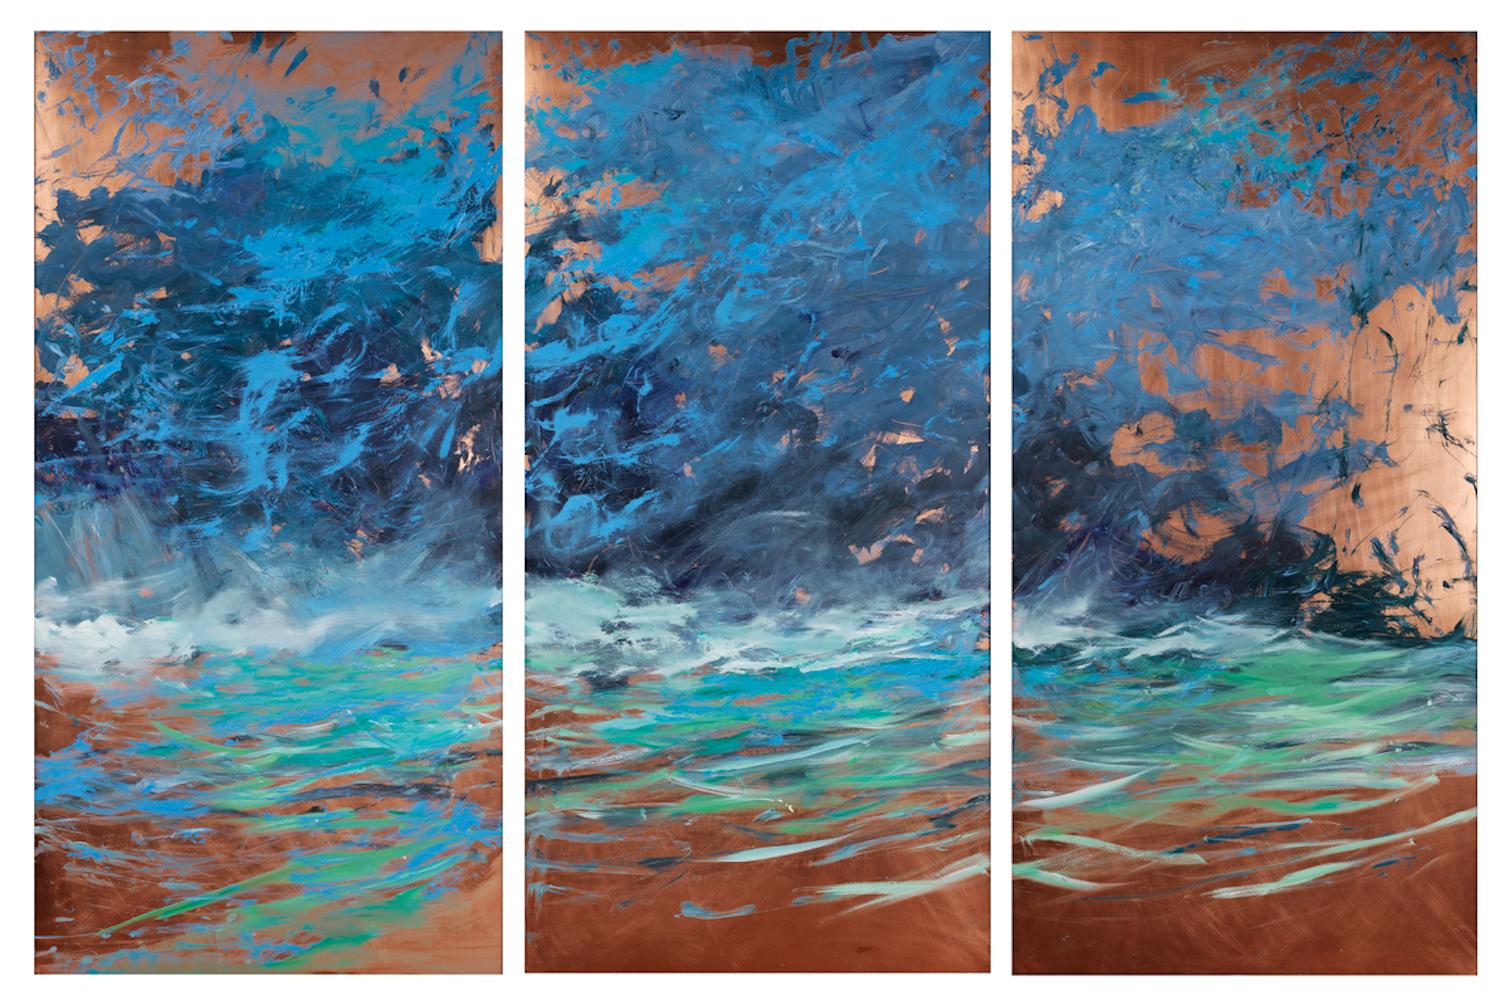 Catherine Picard-Gibbs Landscape Painting - "Tempest", oil painting, copper, landscape, triptych, water, blues, greens